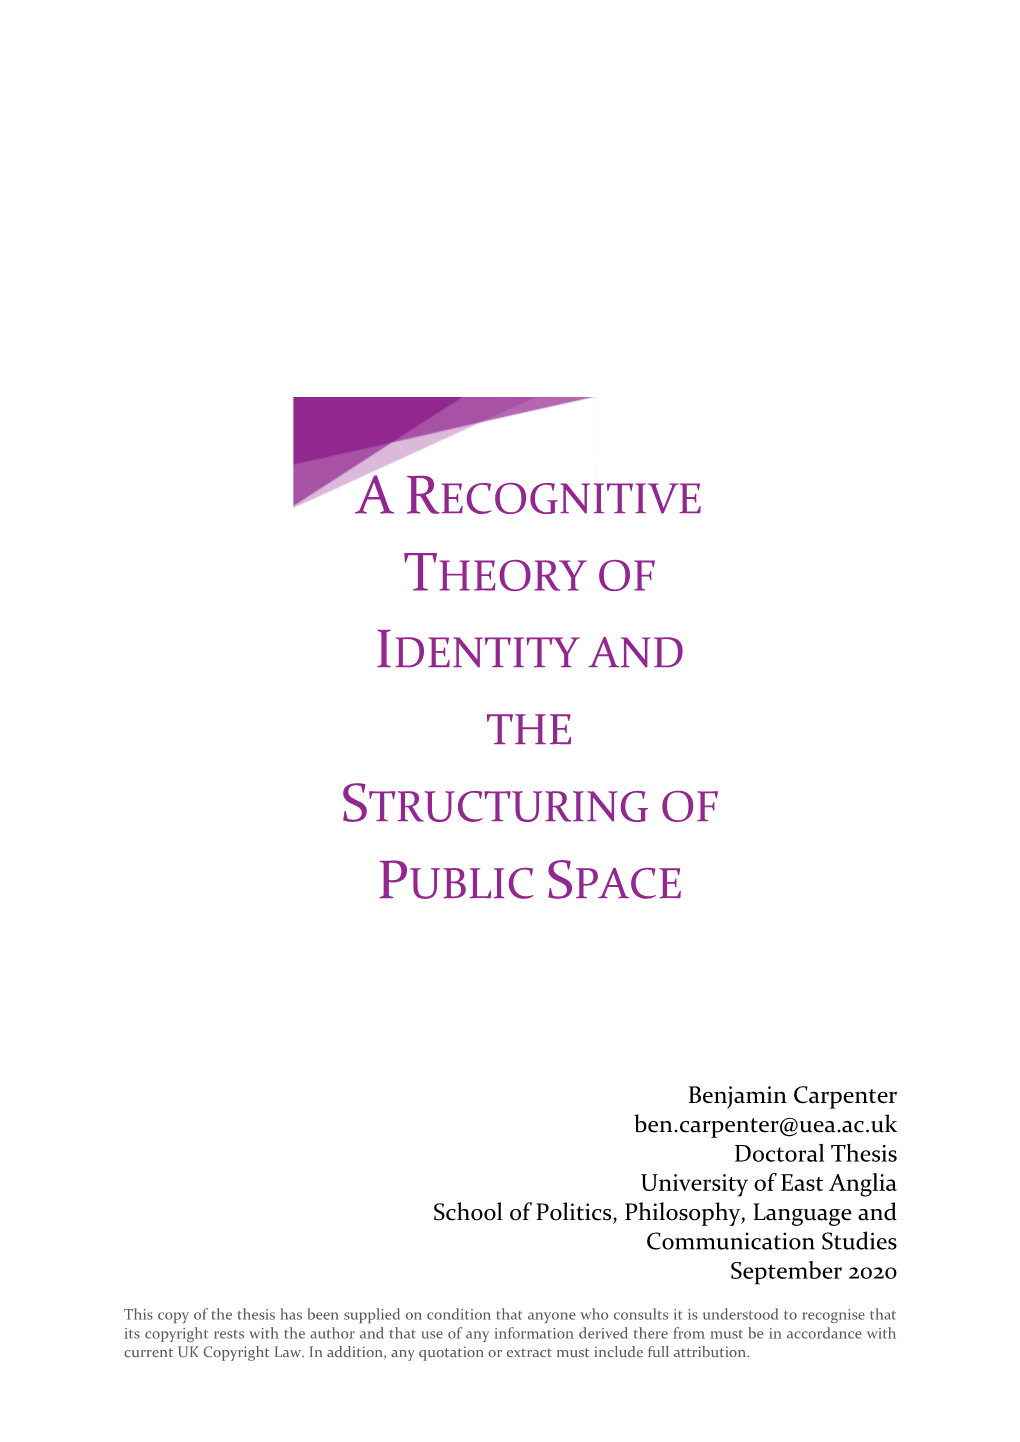 A Recognitive Theory of Identity and the Structuring of Public Space